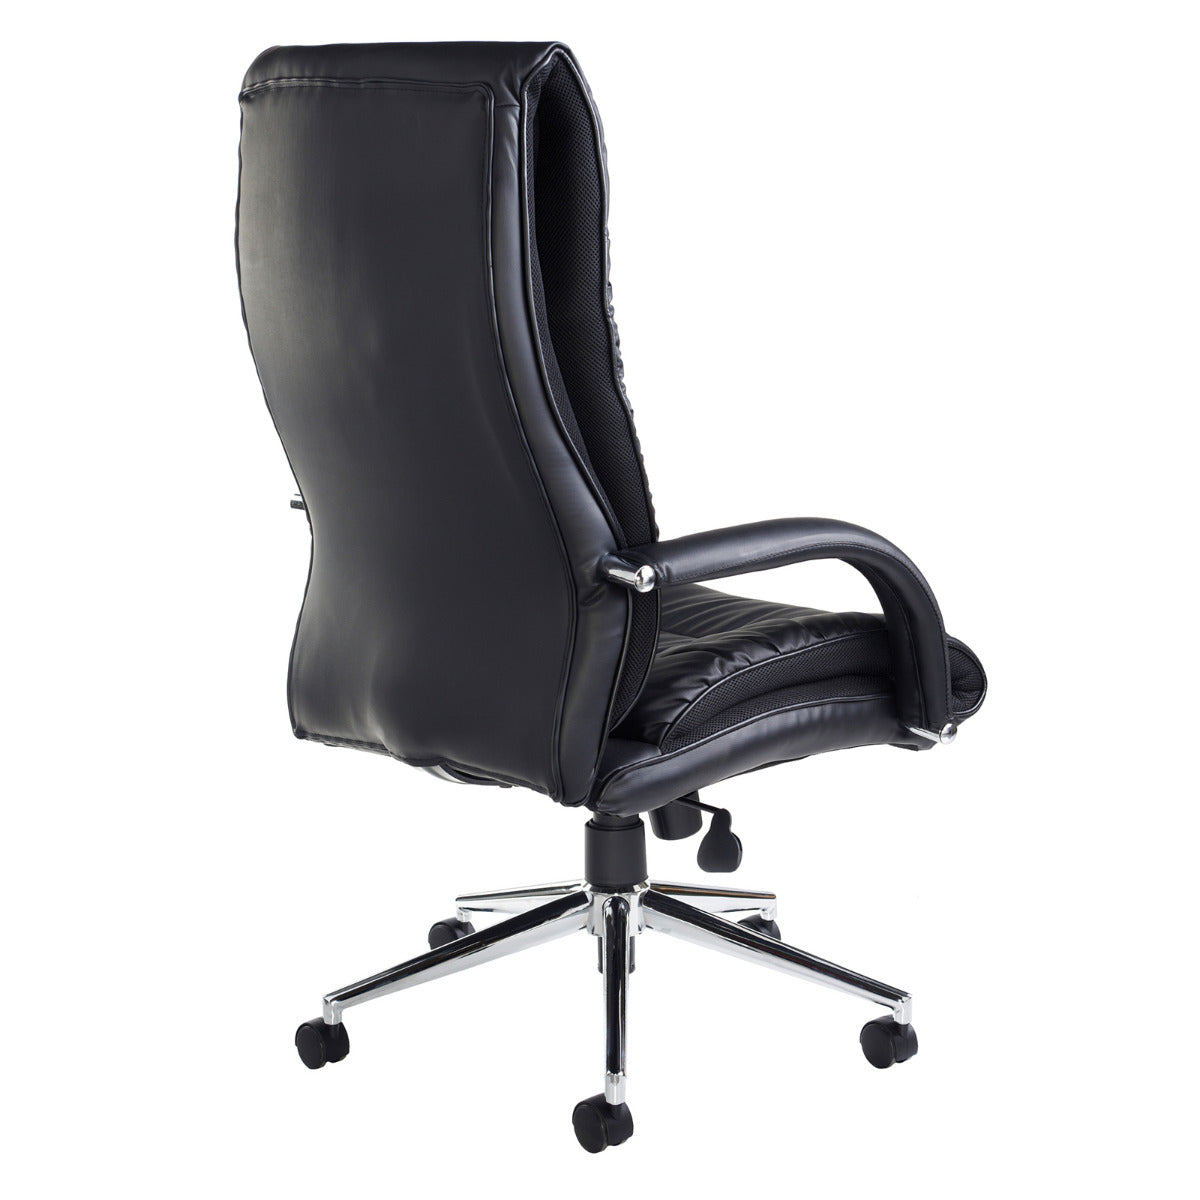 Derby High Back Faux Leather Office Chair